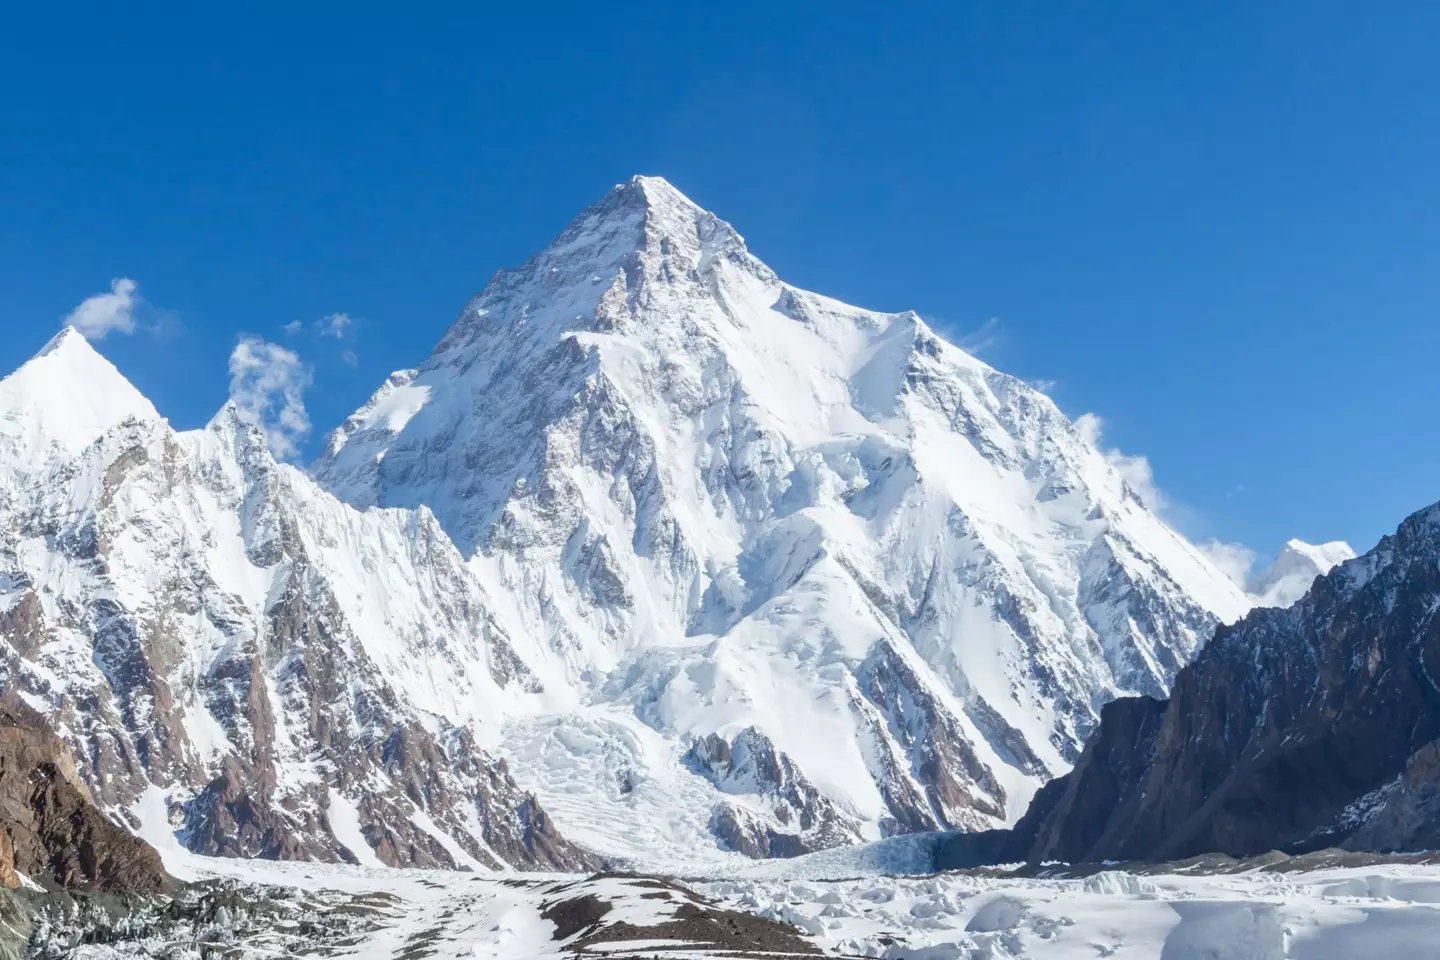 K2 is infamous for its perilous weather and relentless avalanches.